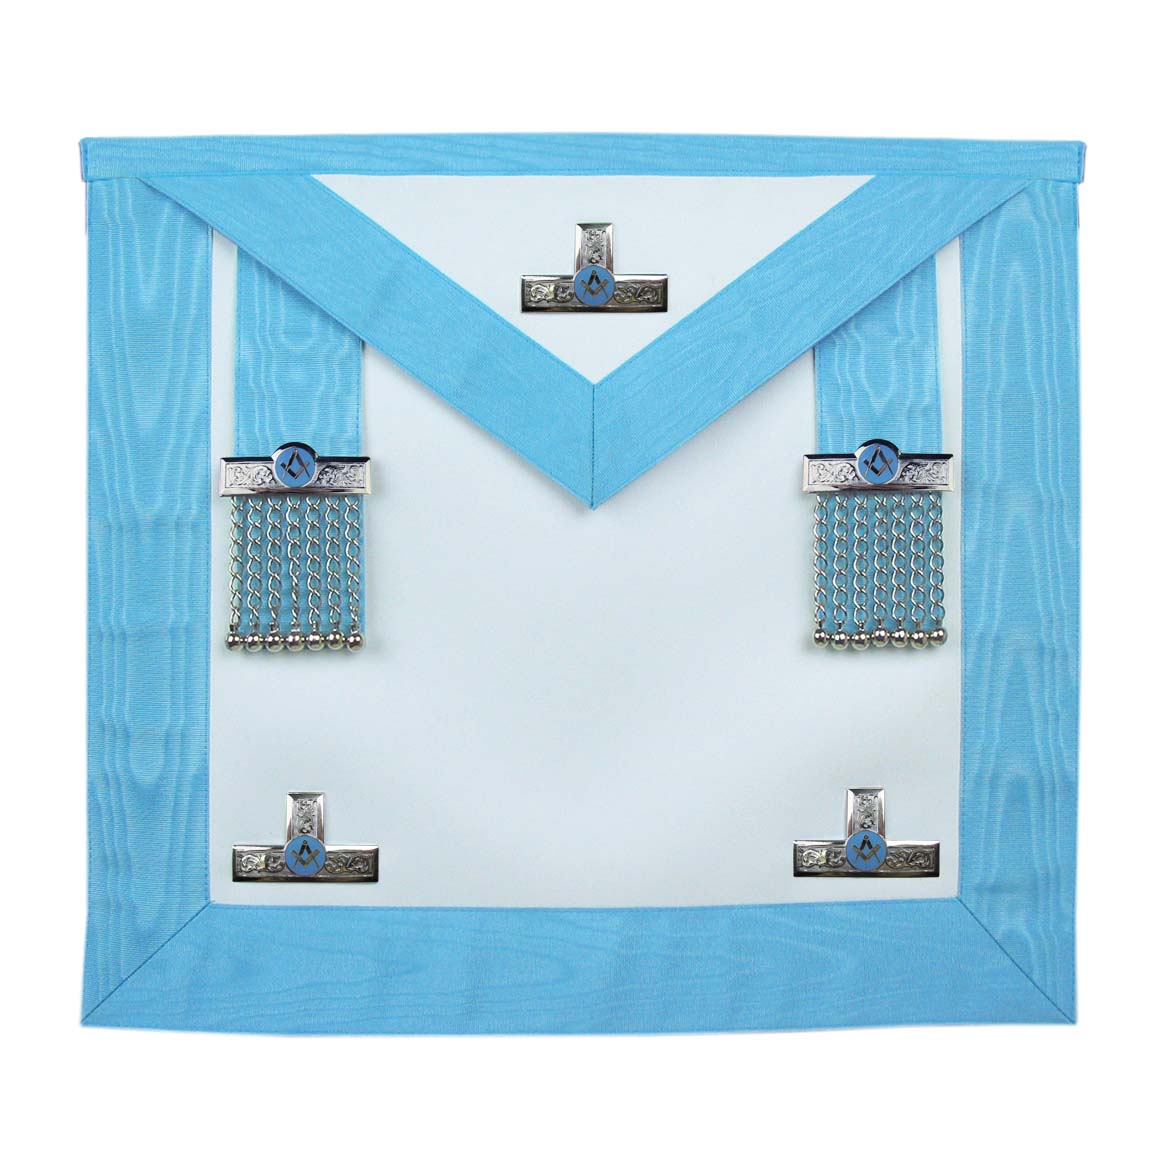 Deluxe Worshipful Master Apron